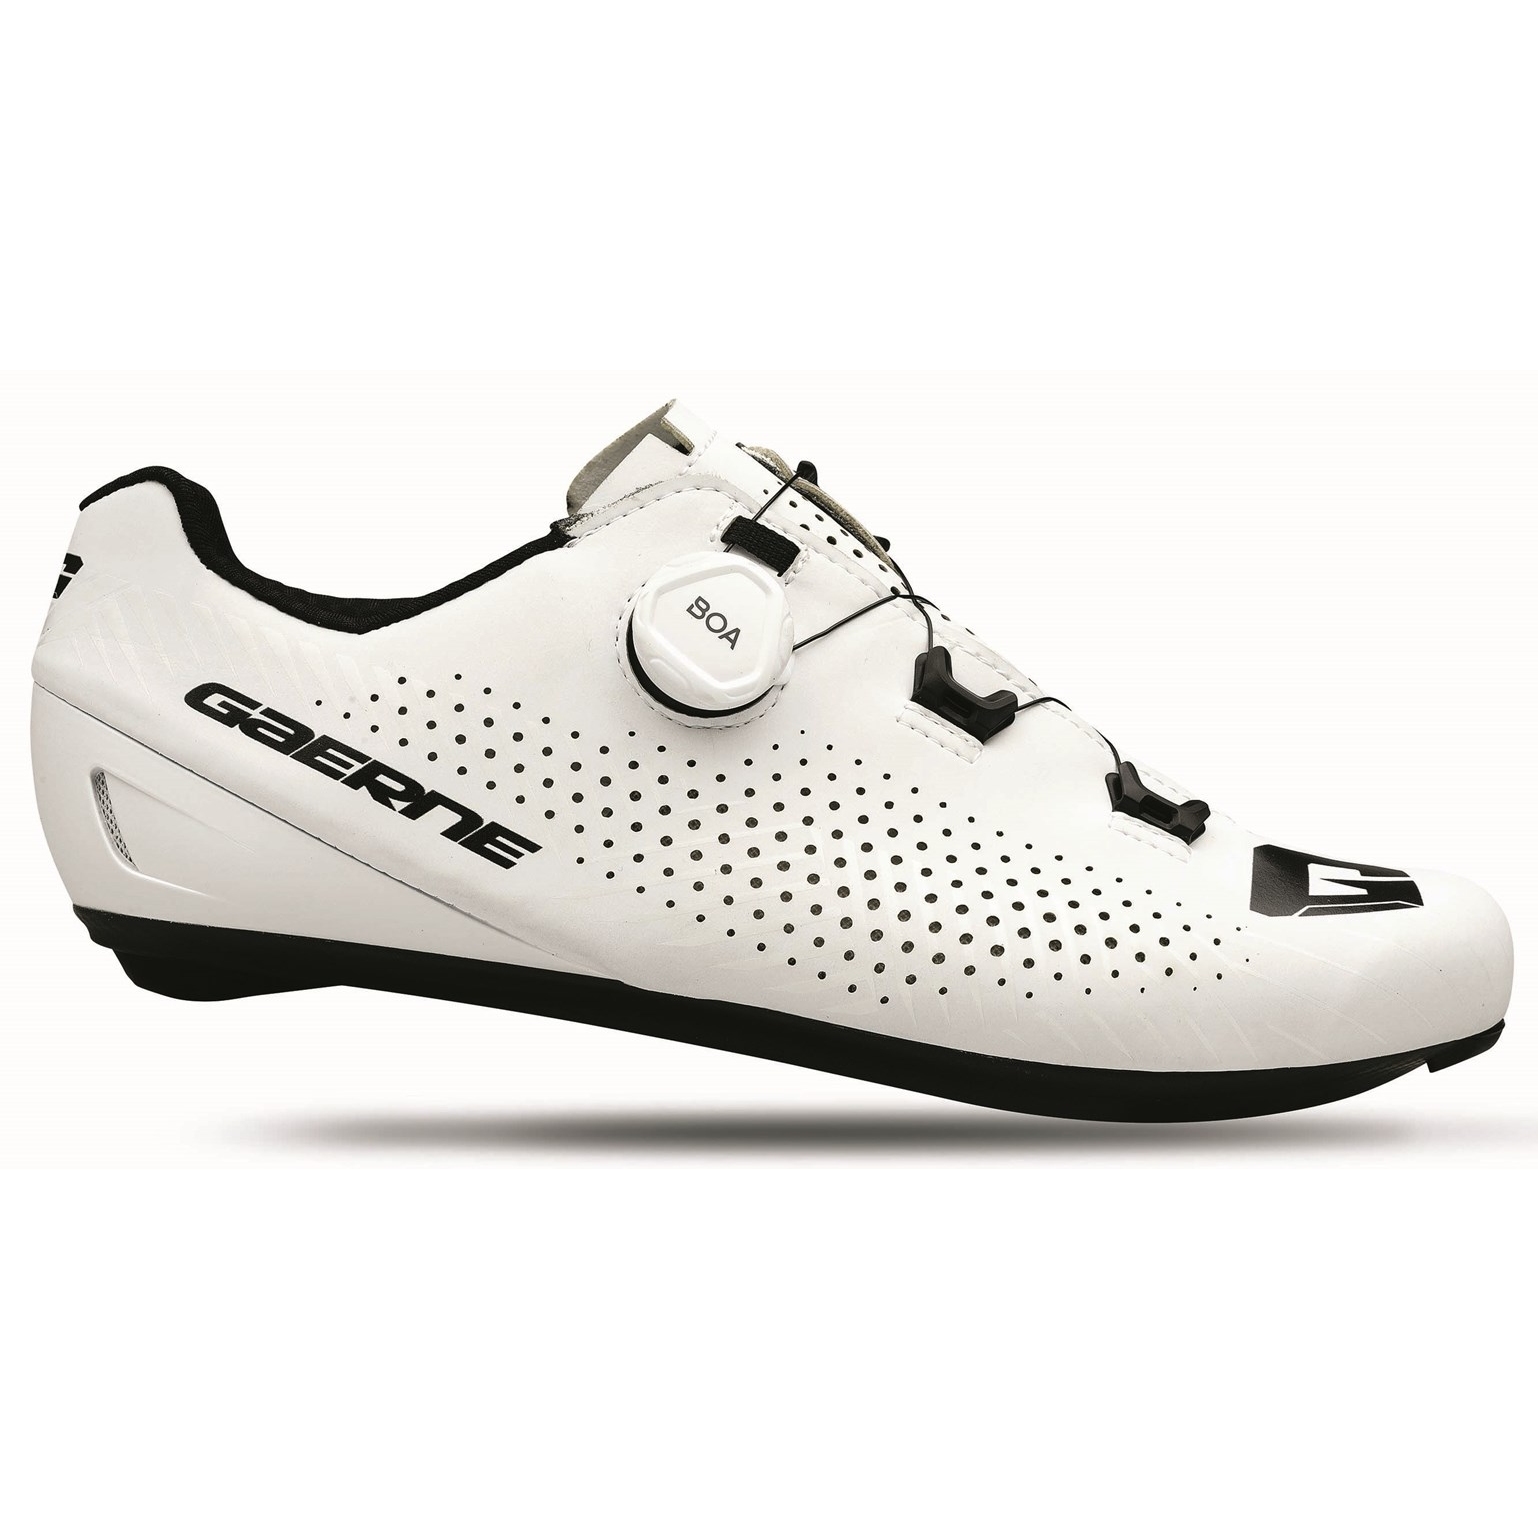 Picture of Gaerne Carbon G.Tuono Road Shoes - Matt White